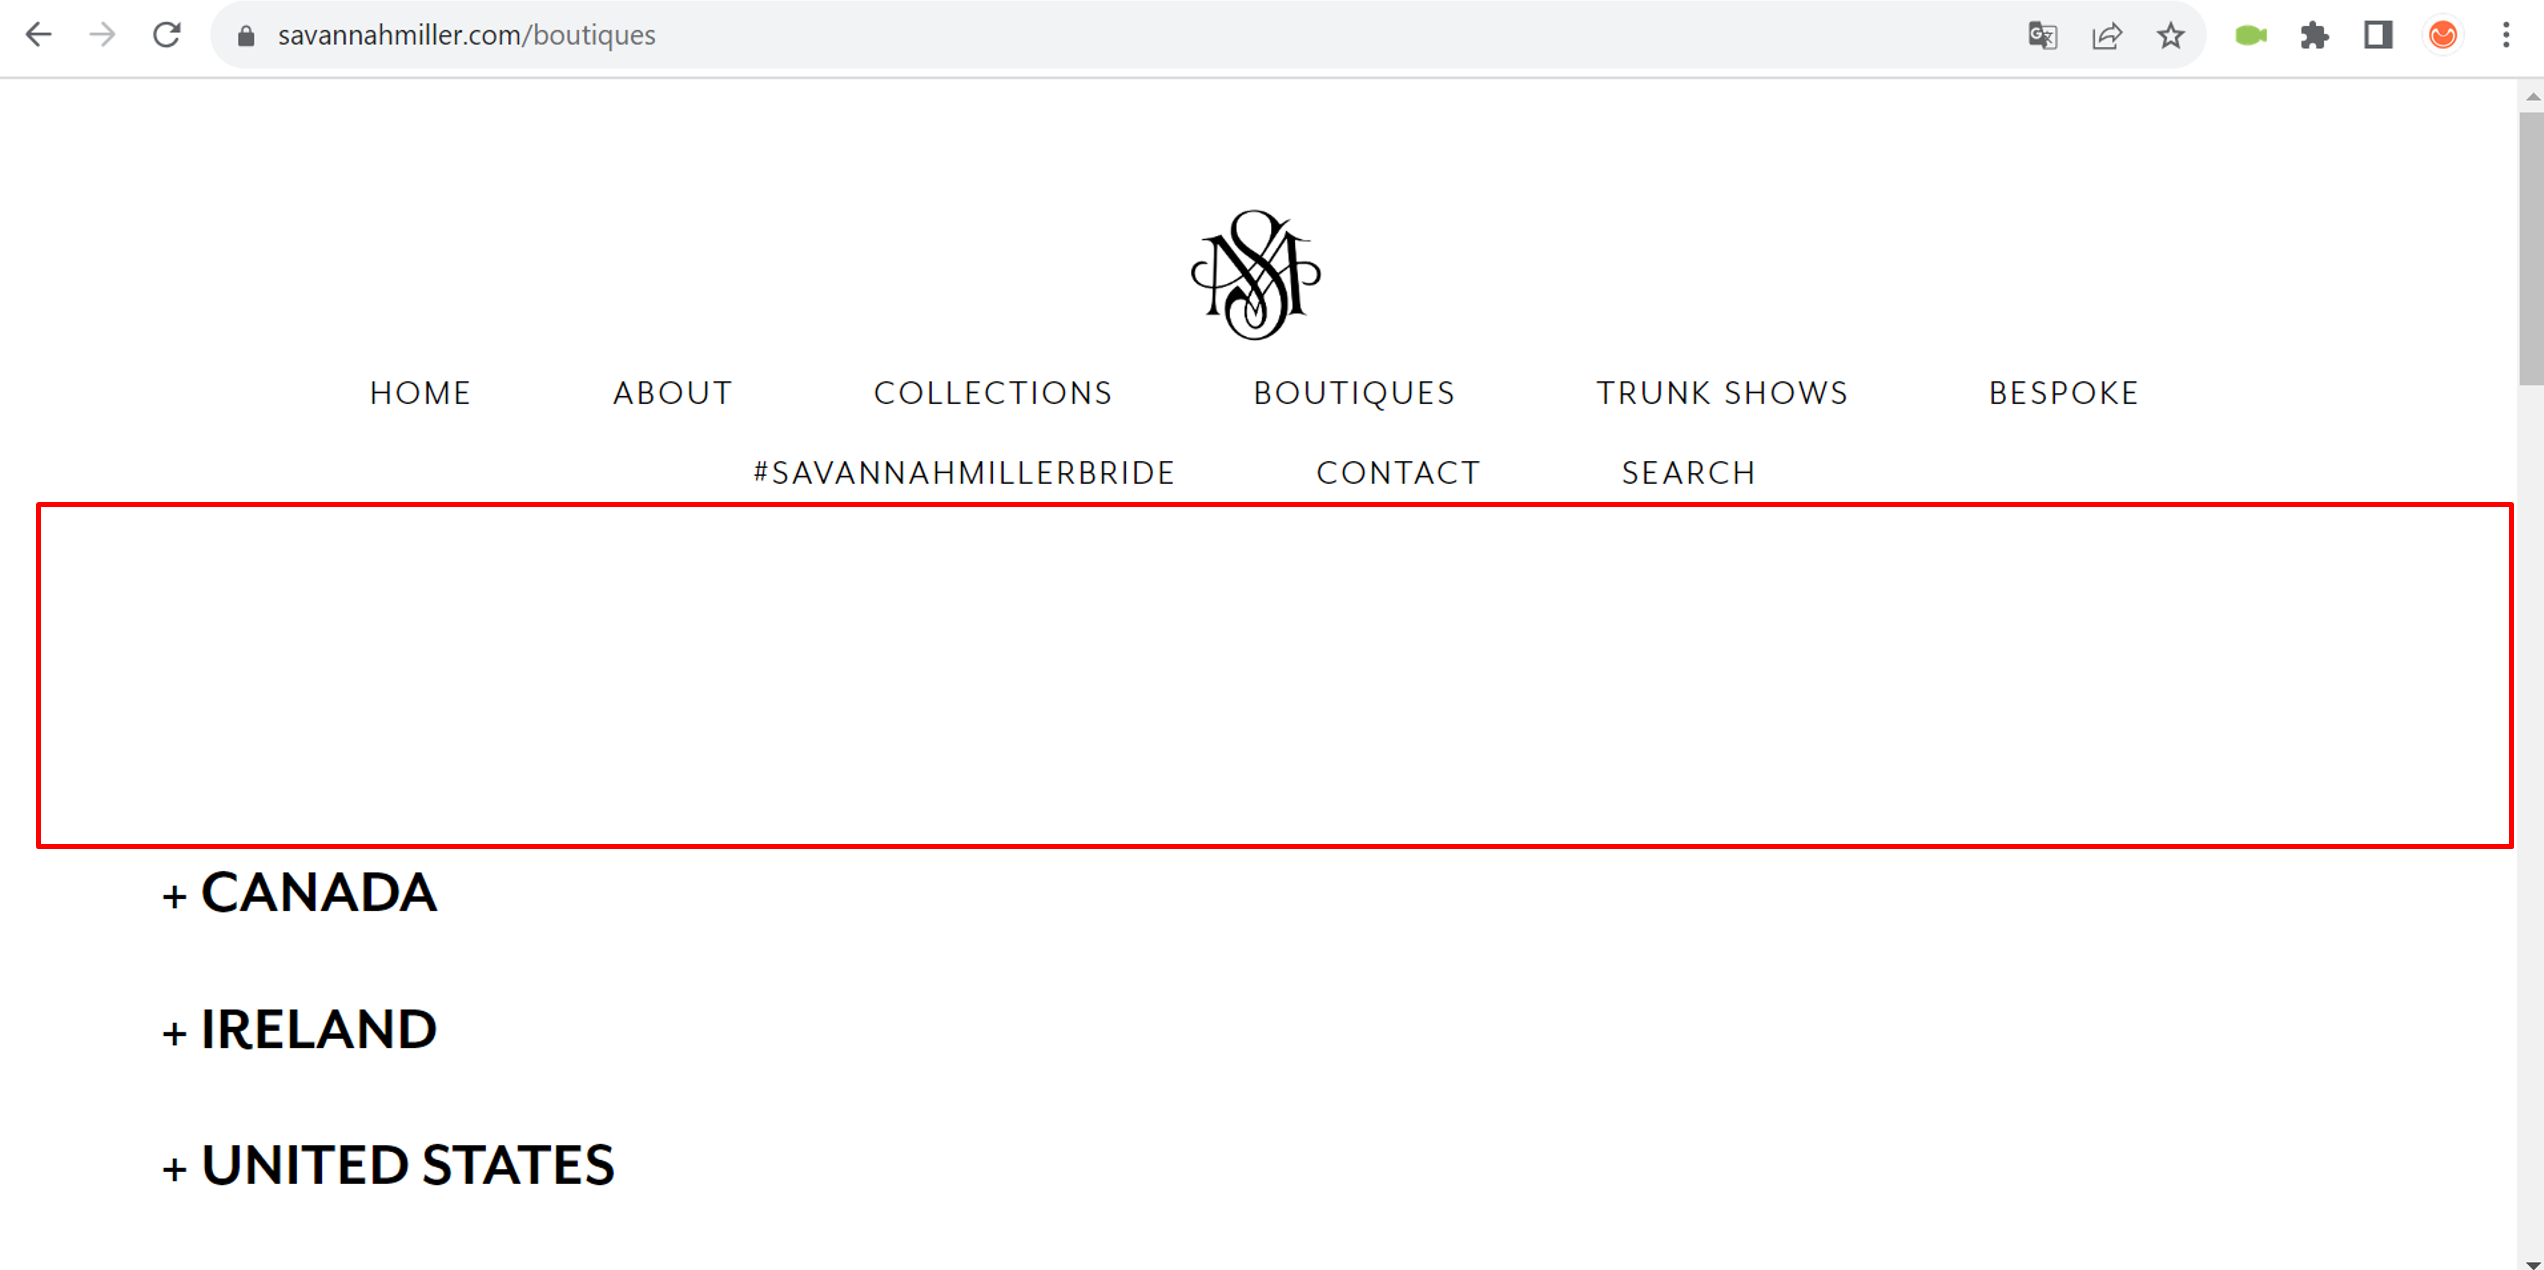 Gap between menu and list of boutiques